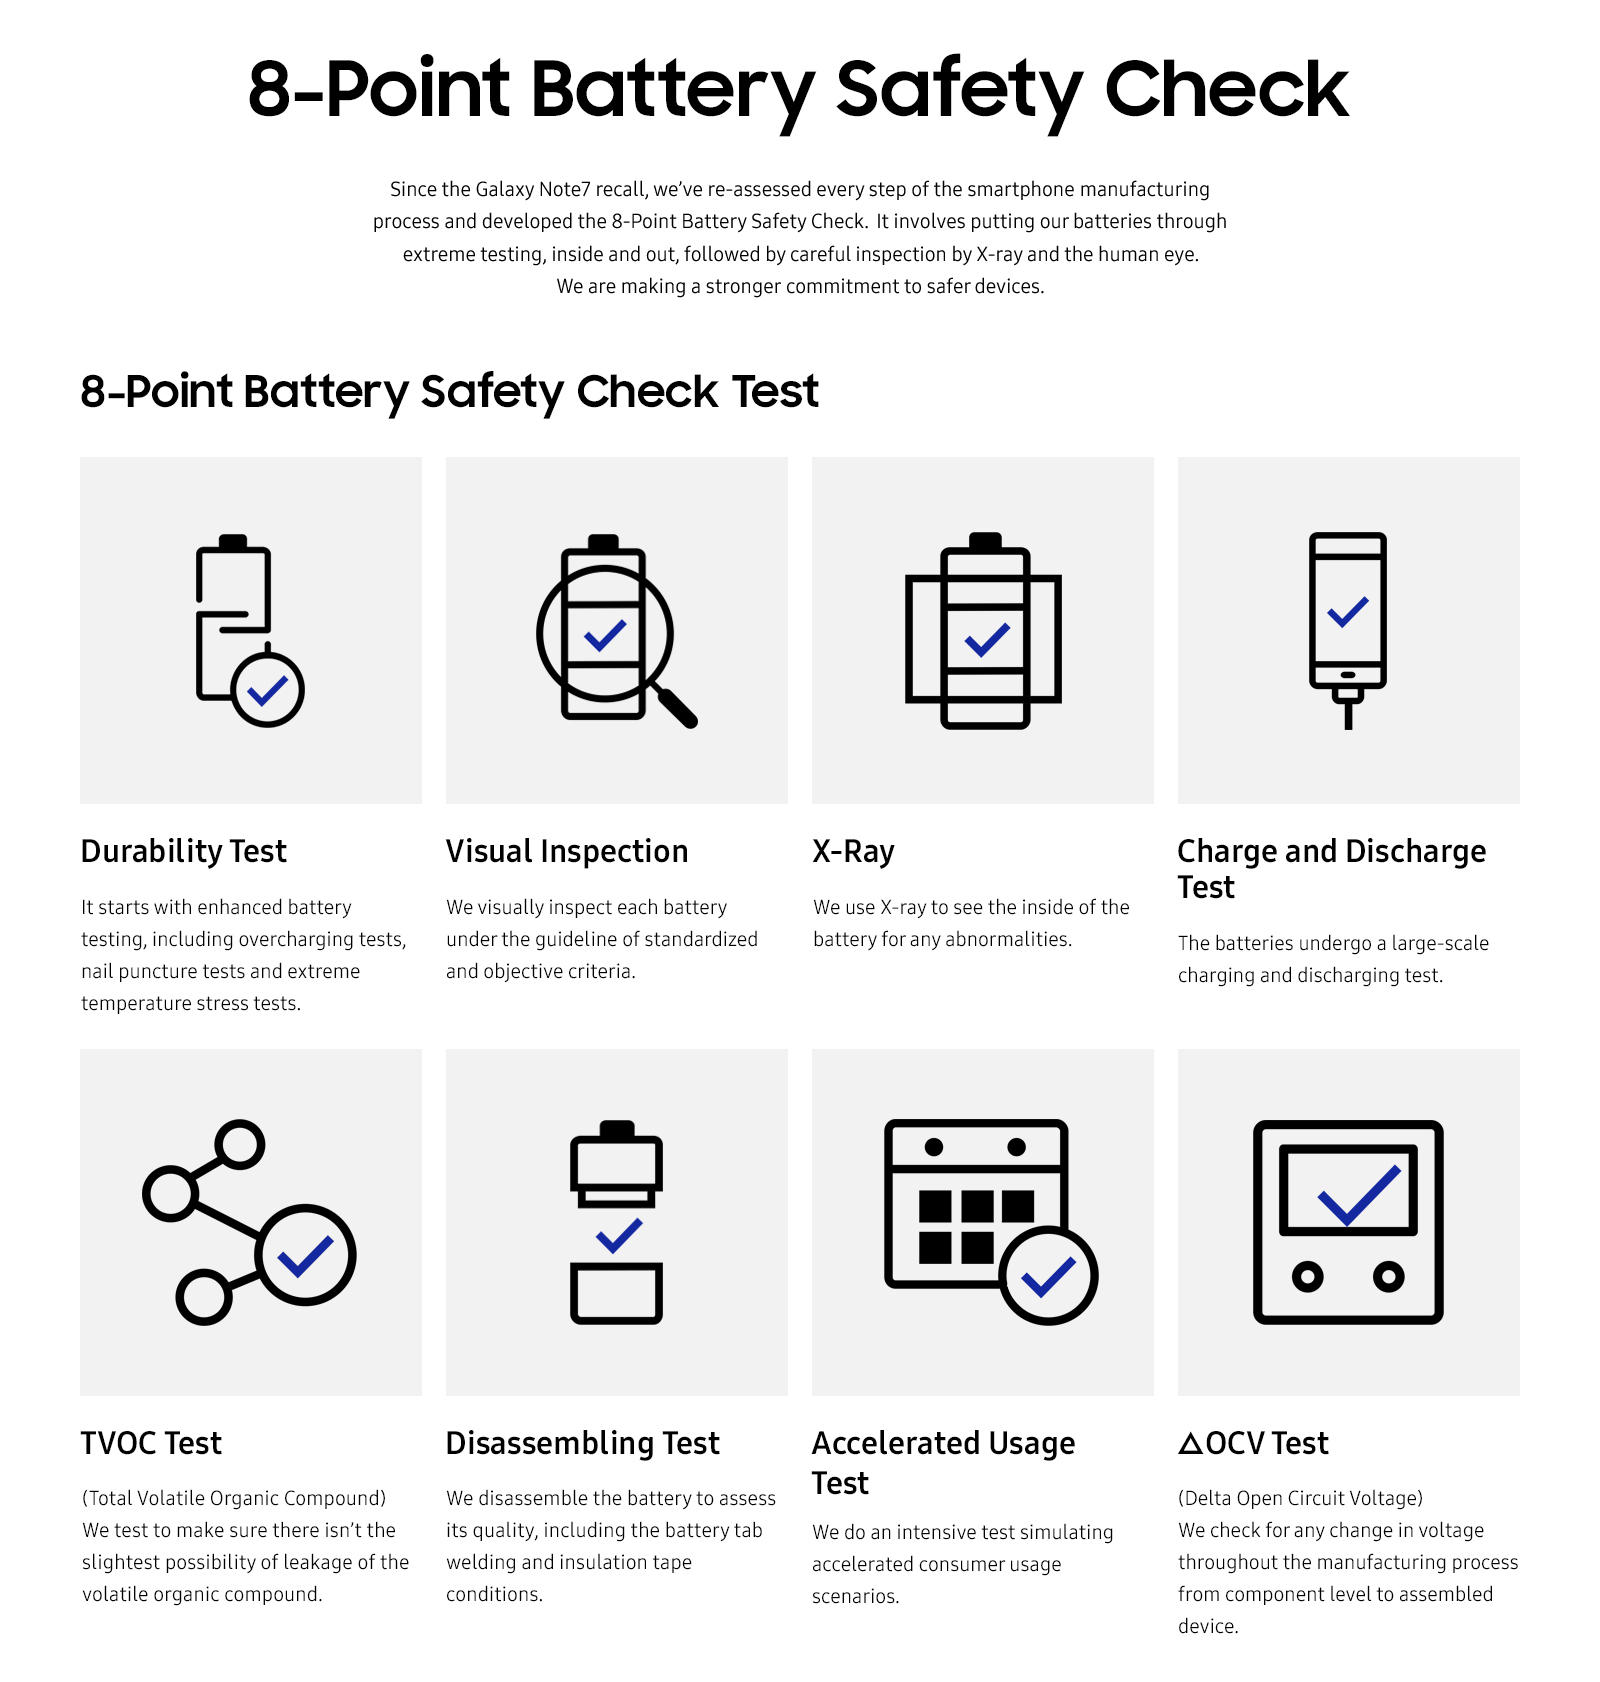 galaxy note 7 8-point battery safety check